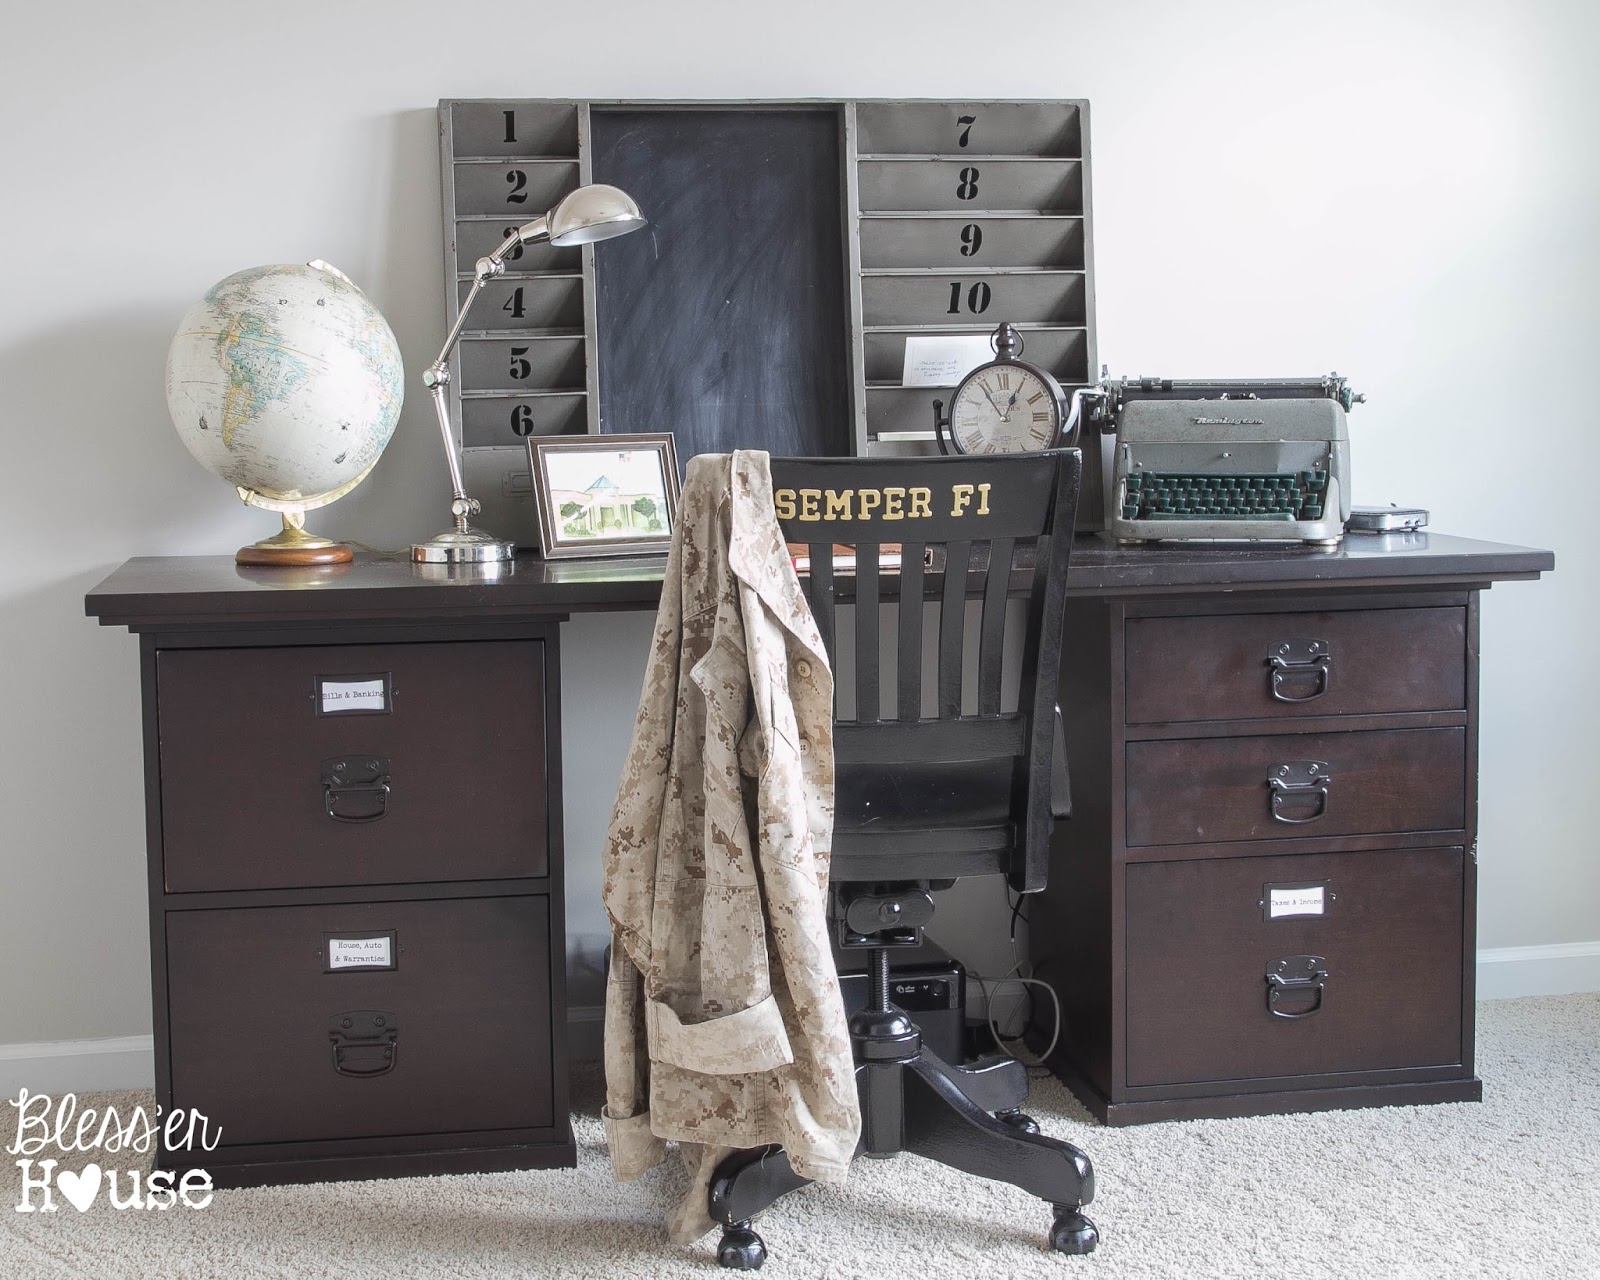 Vintage Inspired OfficeBless'er House-How I Found My Style Sundays- From My Front Porch To Yours